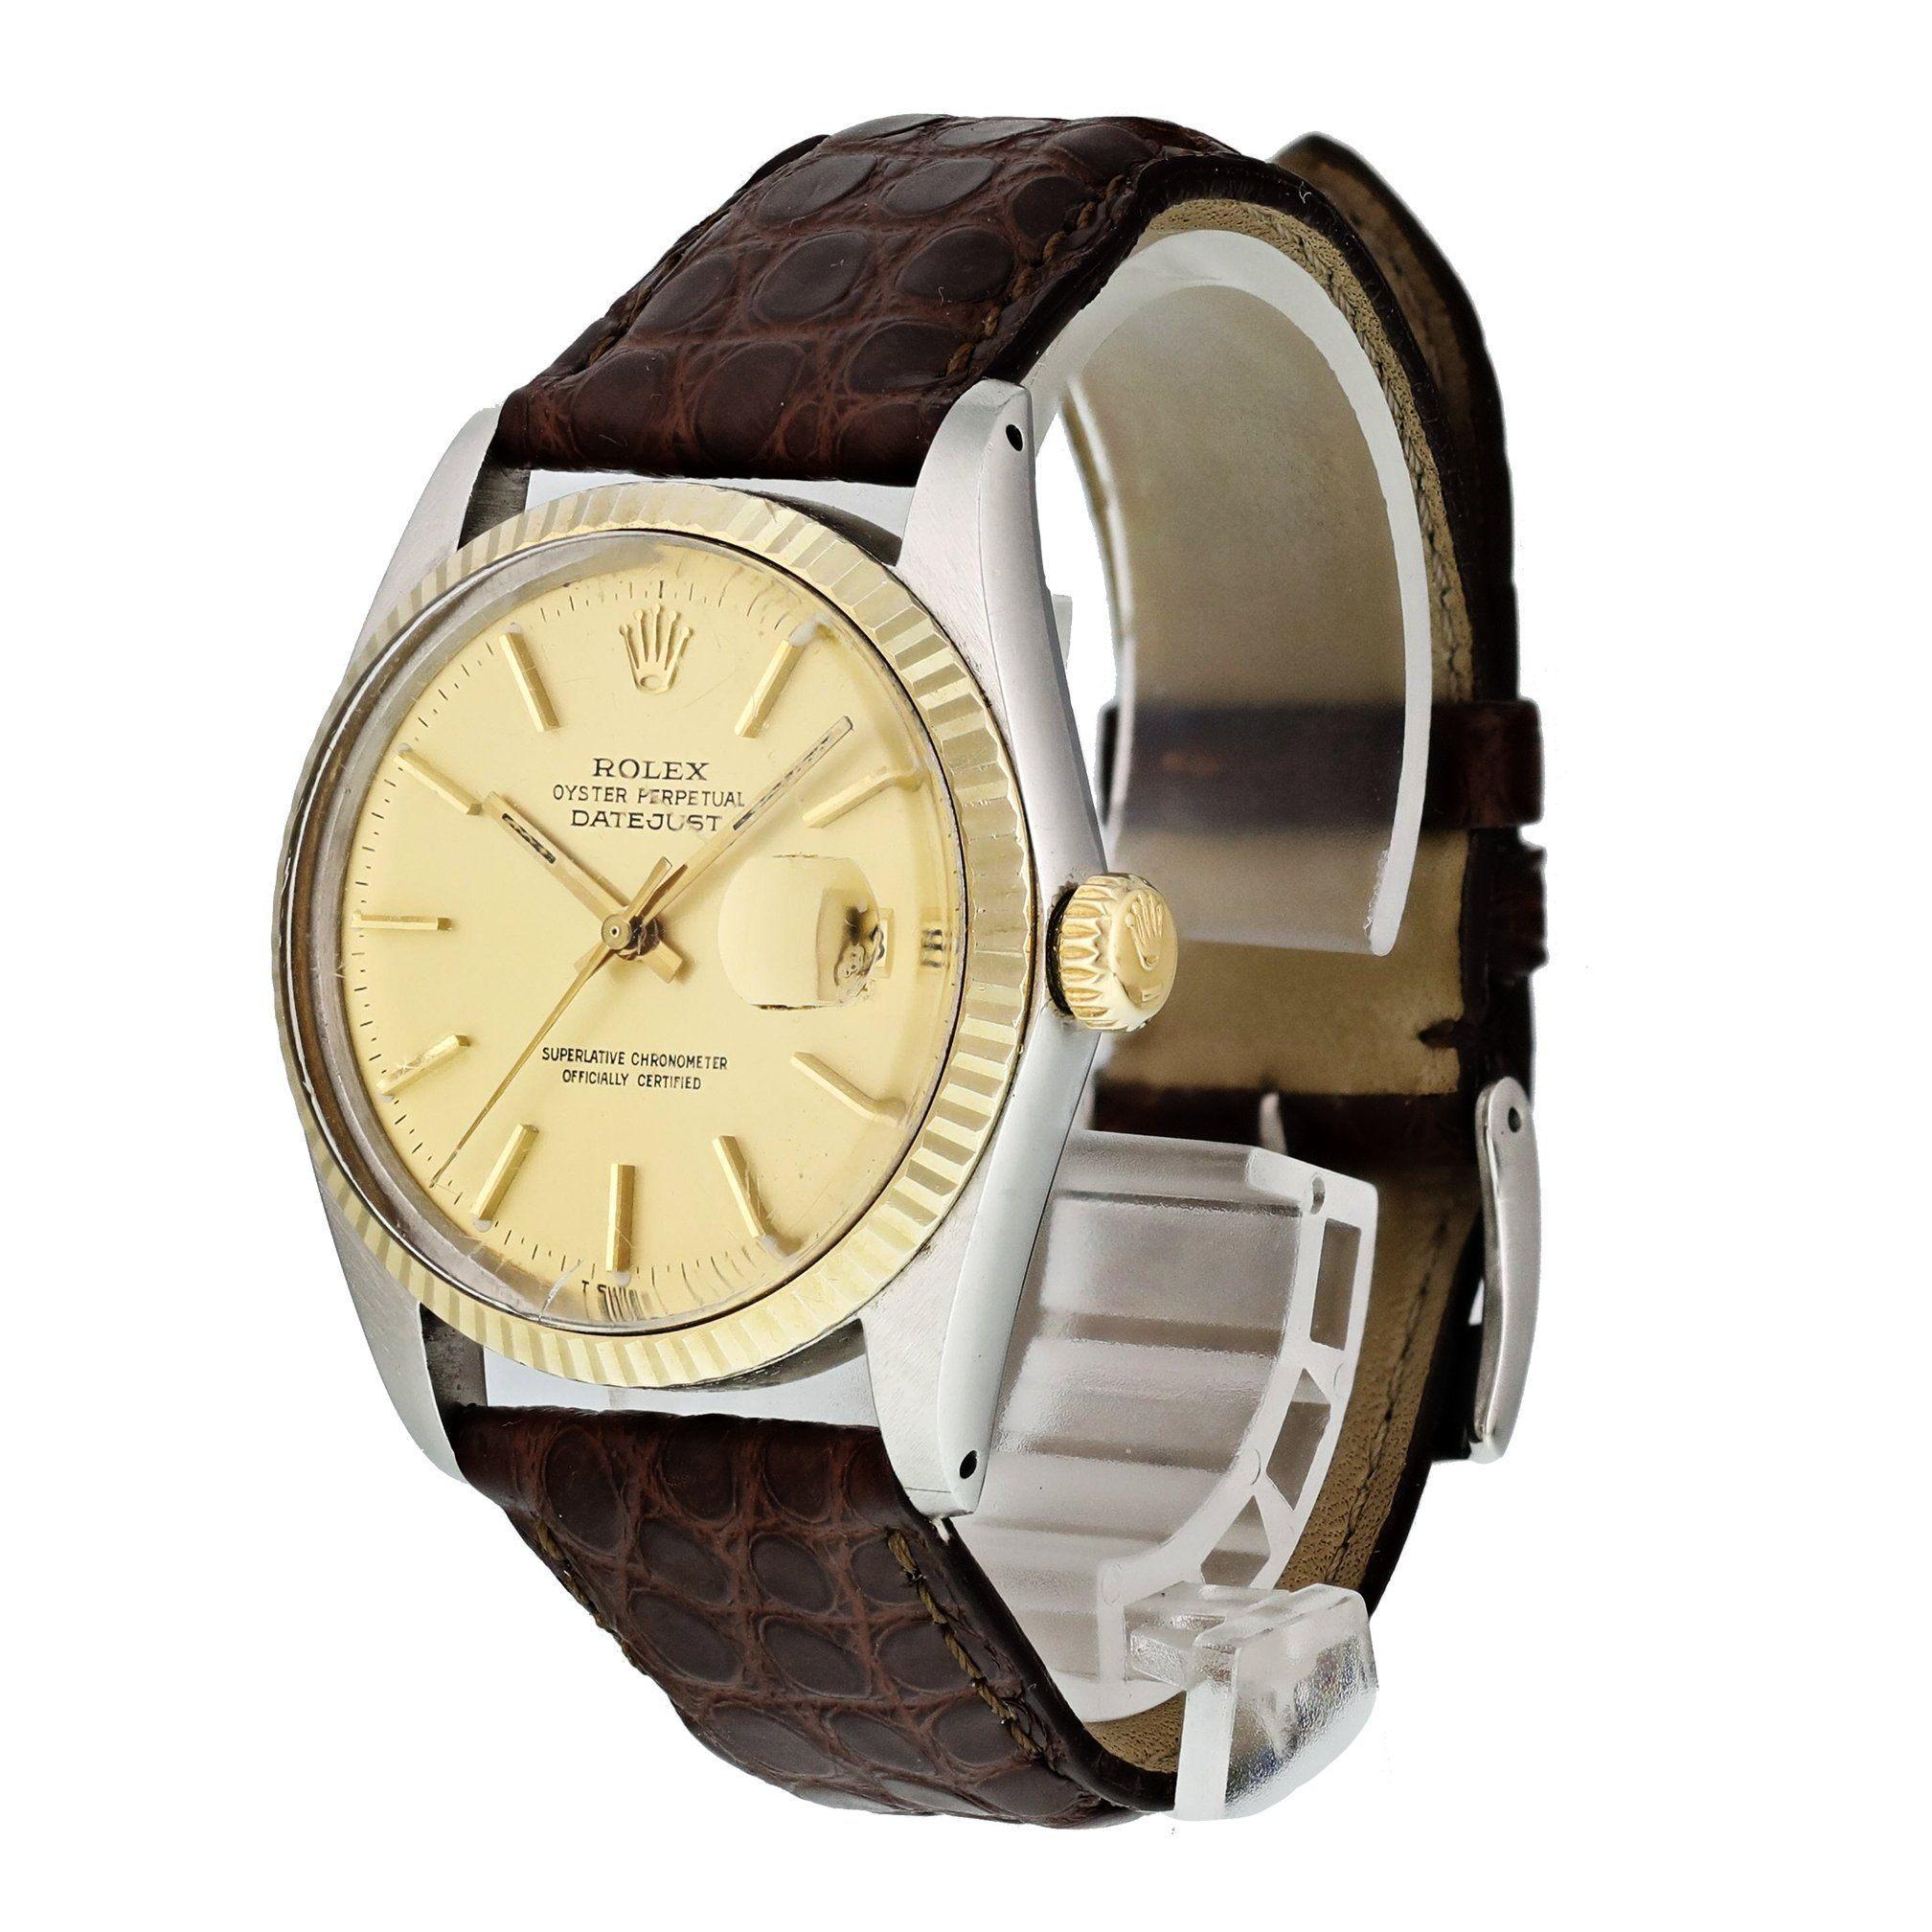 Rolex Datejust 16013 Men's Watch In Excellent Condition For Sale In New York, NY